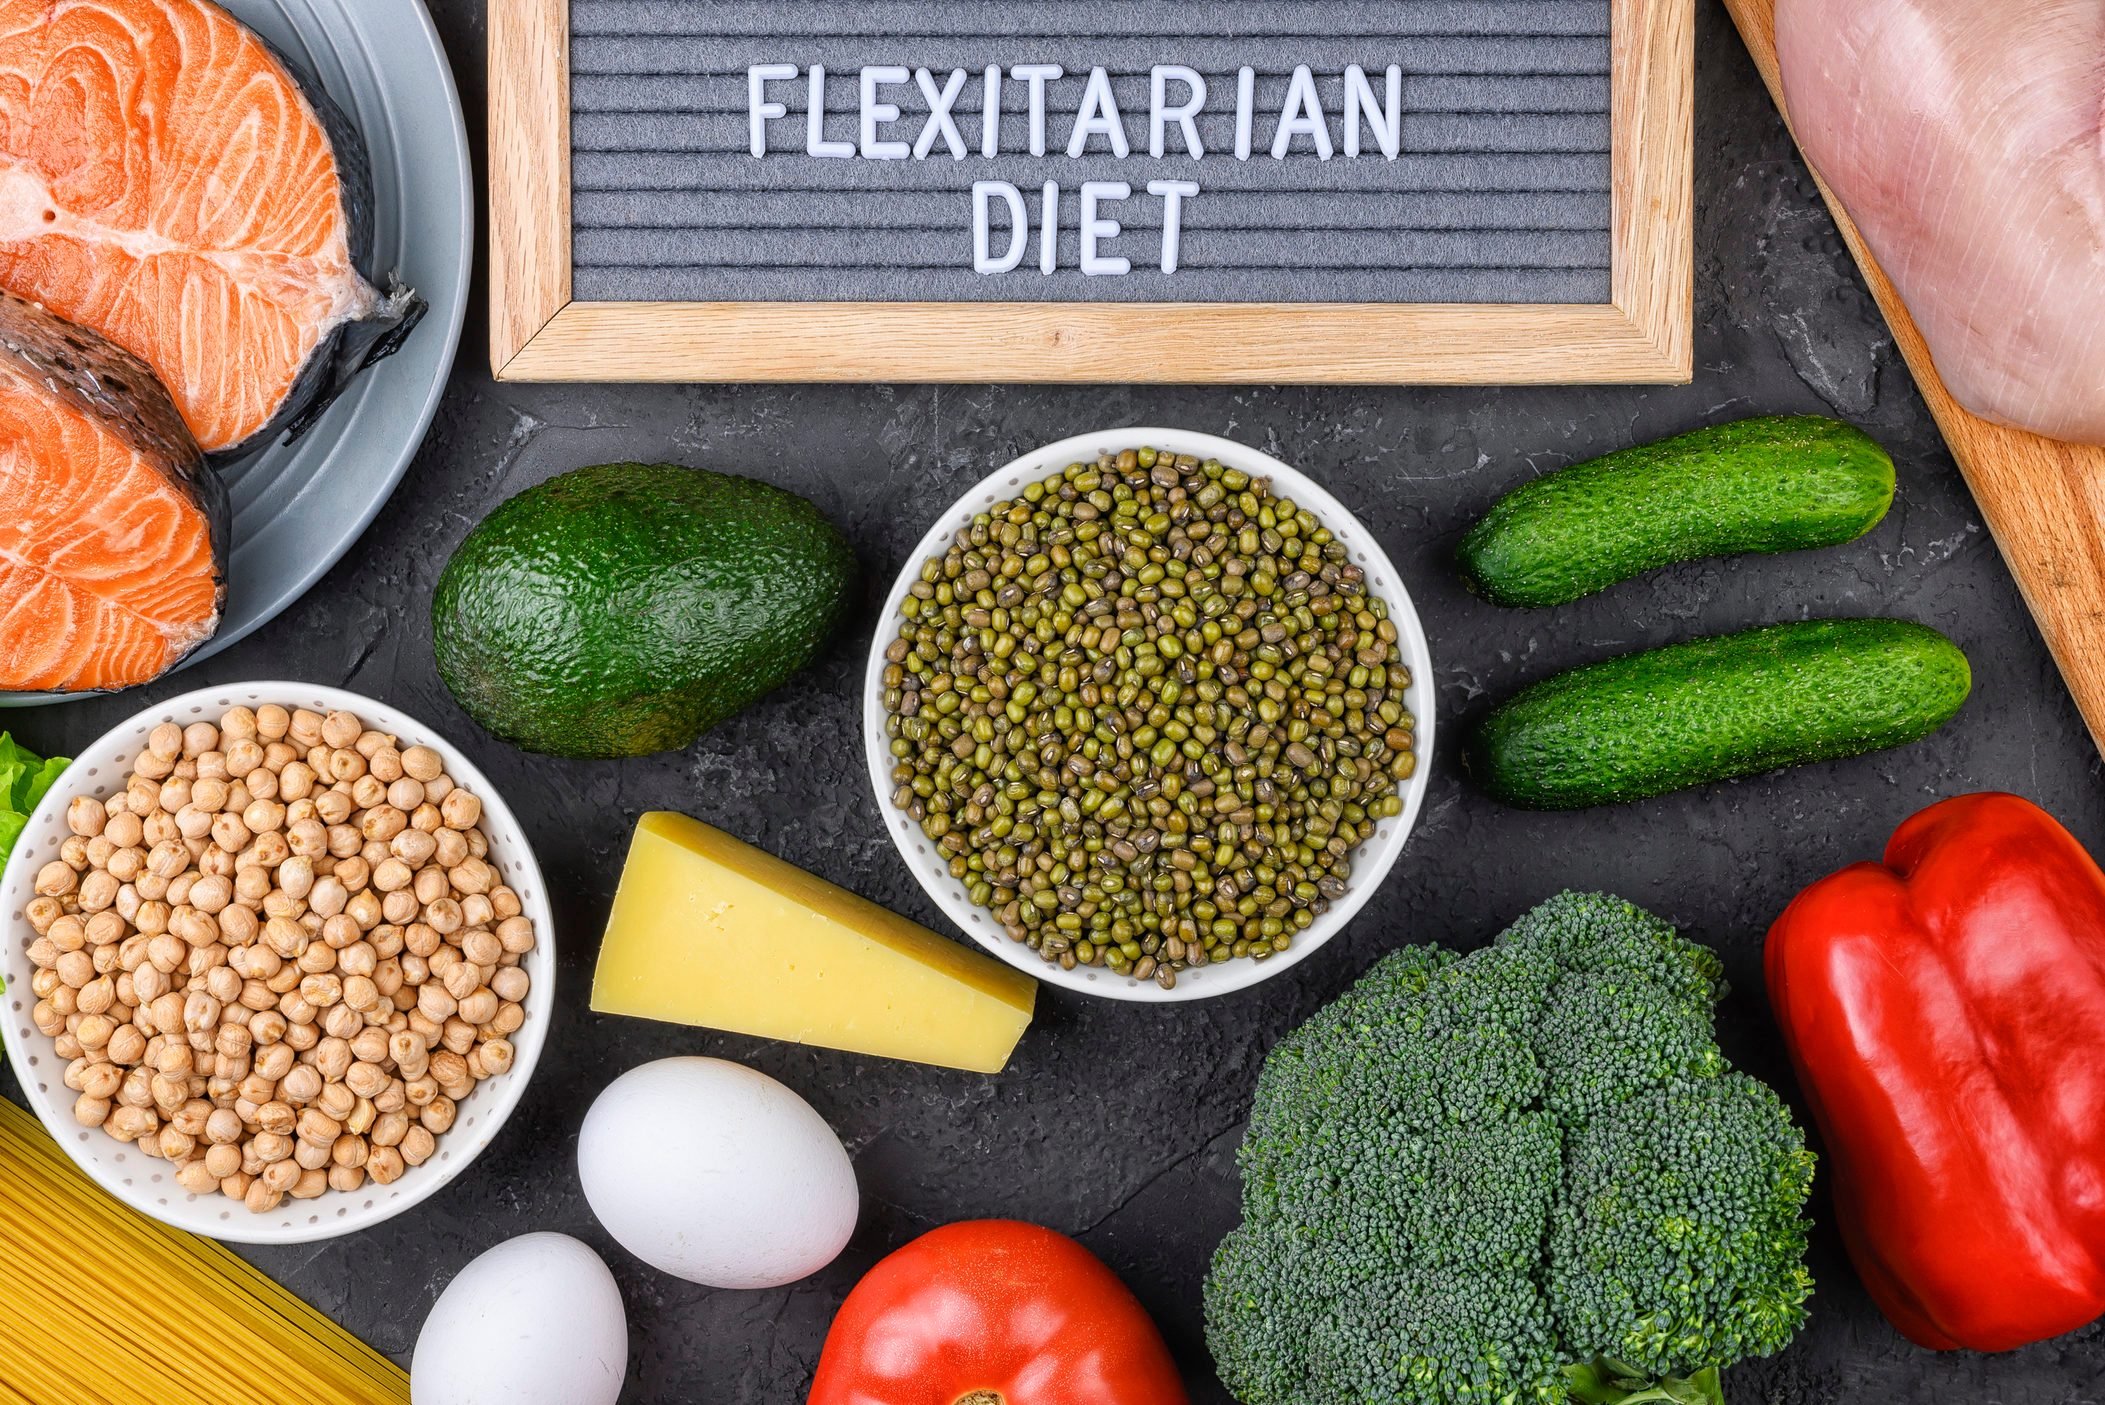 Flexitarian Diet Guide What to Eat, What to Avoid, and More The Healthy